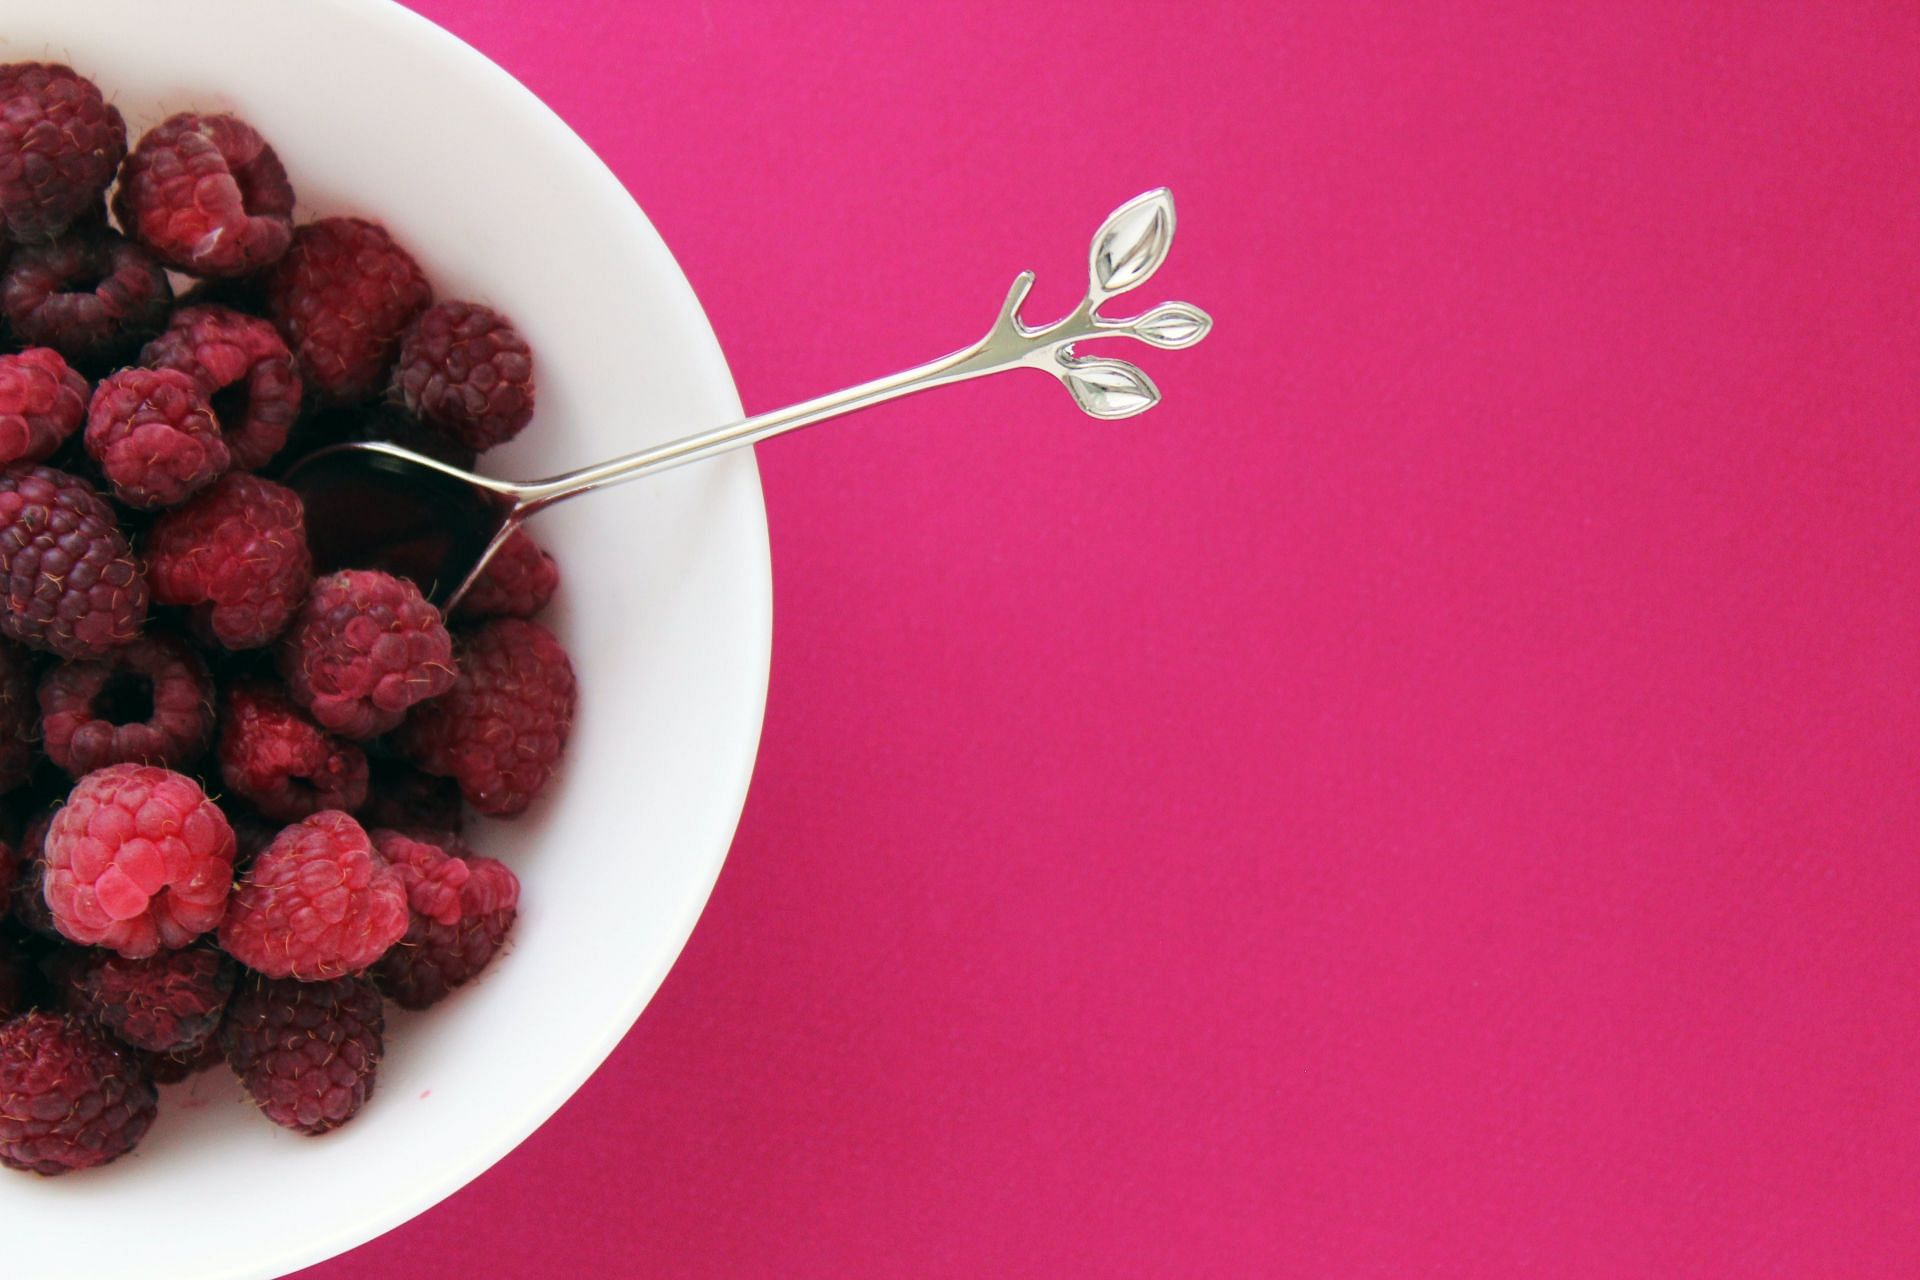 Berries are food to stimulate the brain (Image sourced via Pexels / Photo by tijana)